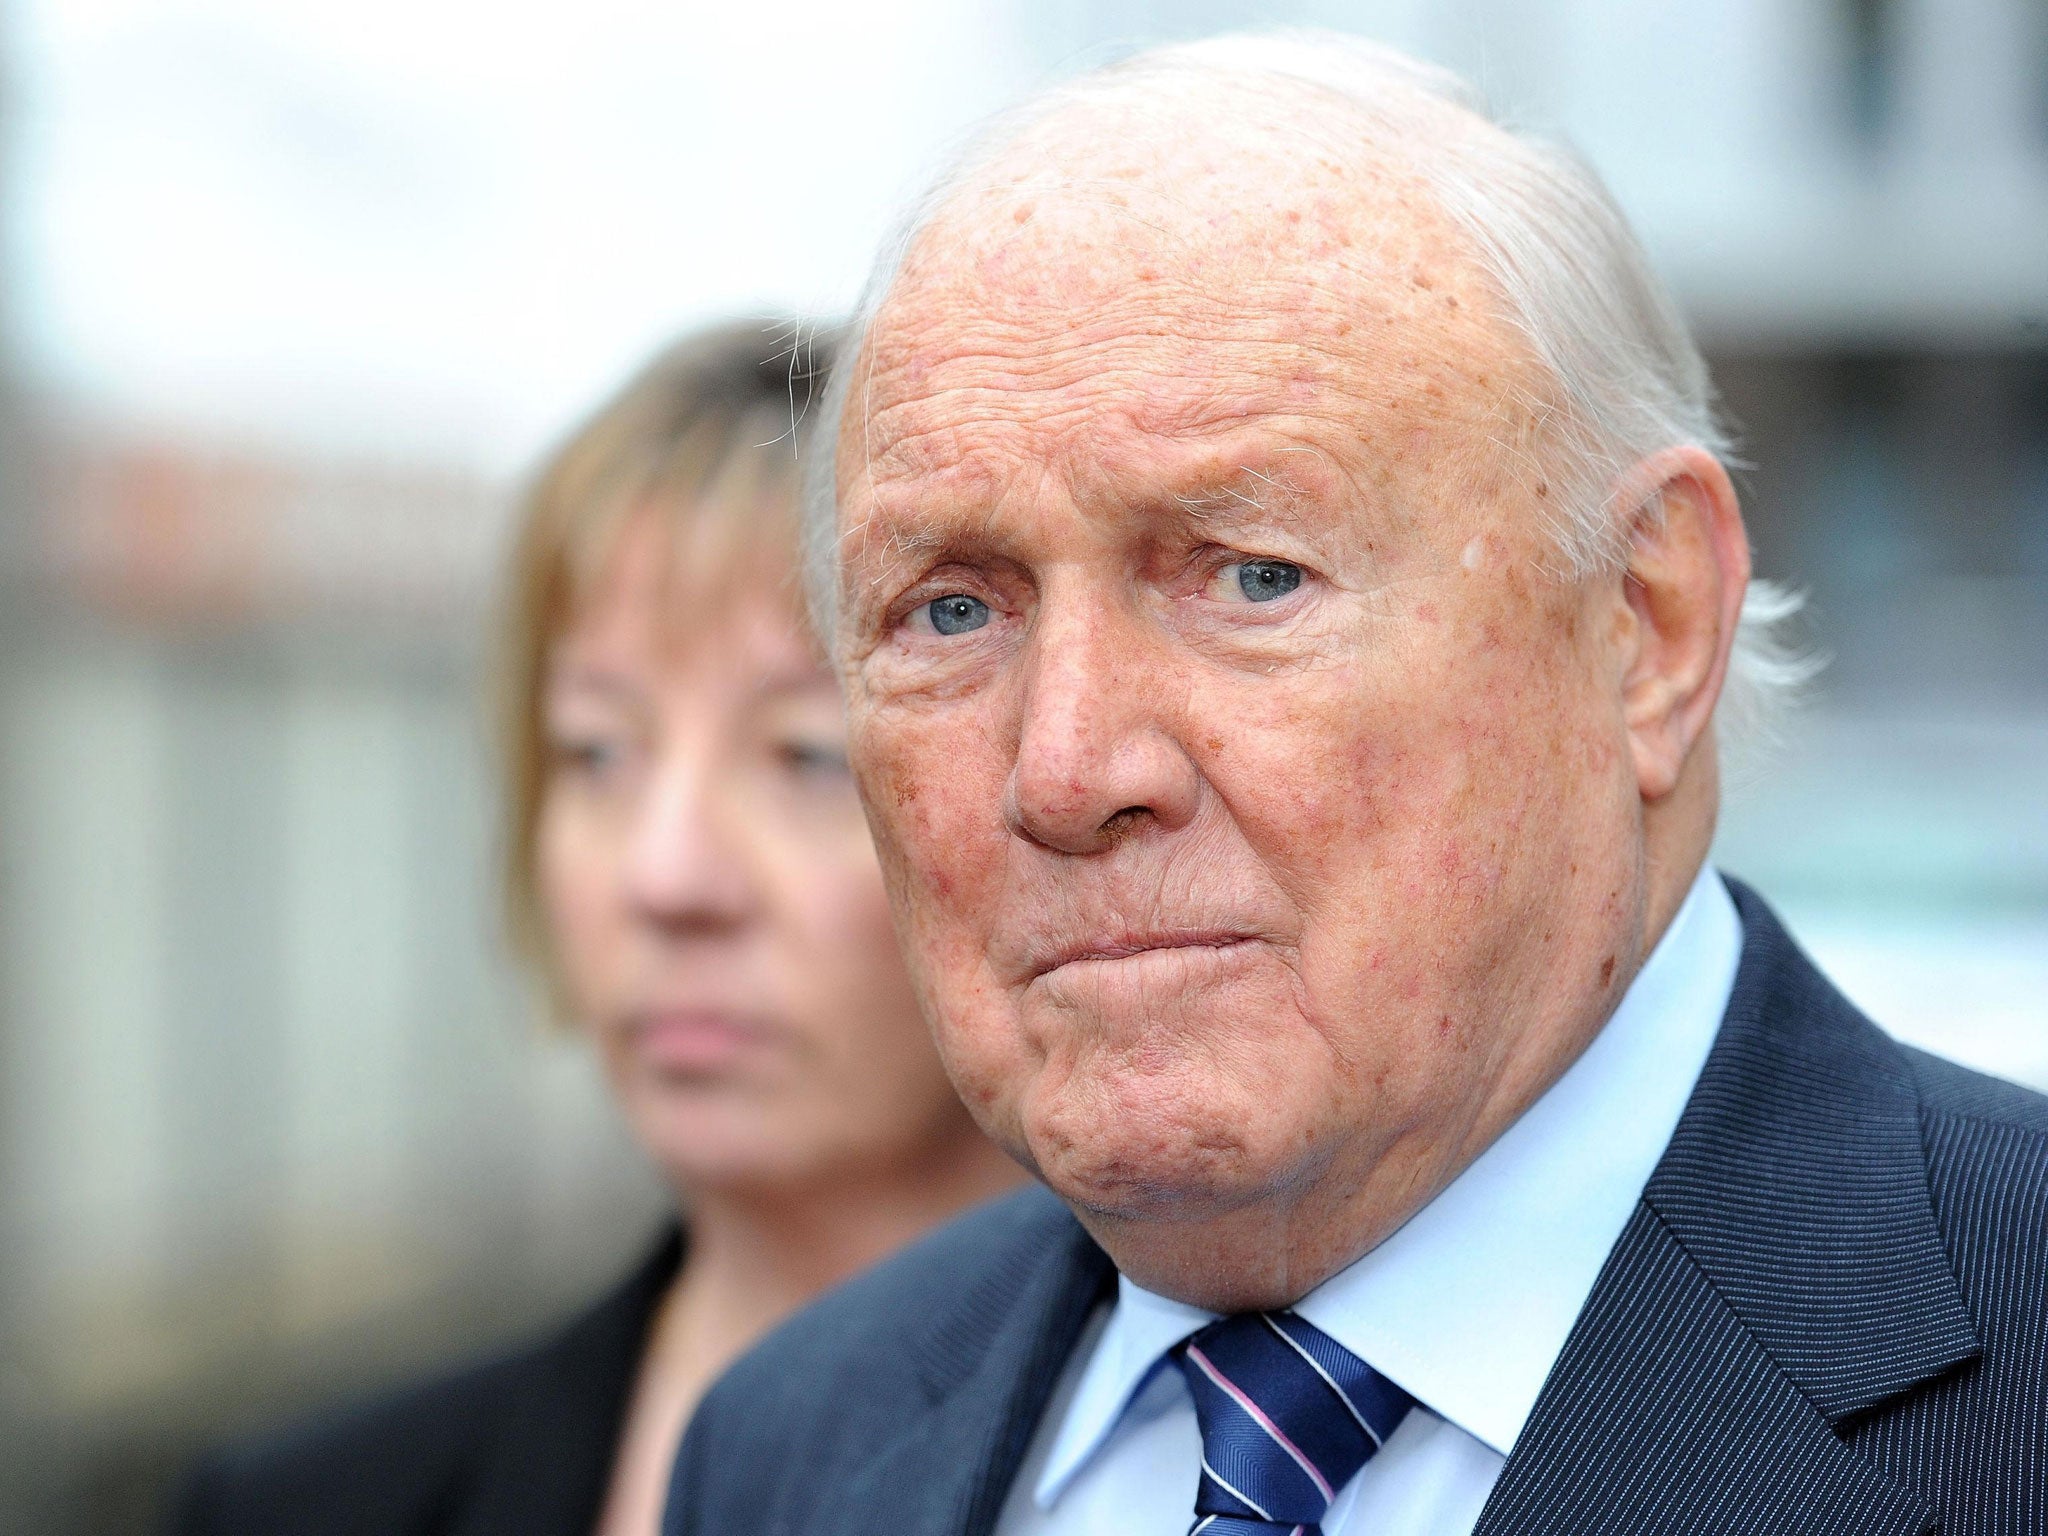 File photo shows Stuart Hall outside Preston Crown Court, where today he faced an ongoing trial into allegations of rape and indecent assault against two young girls